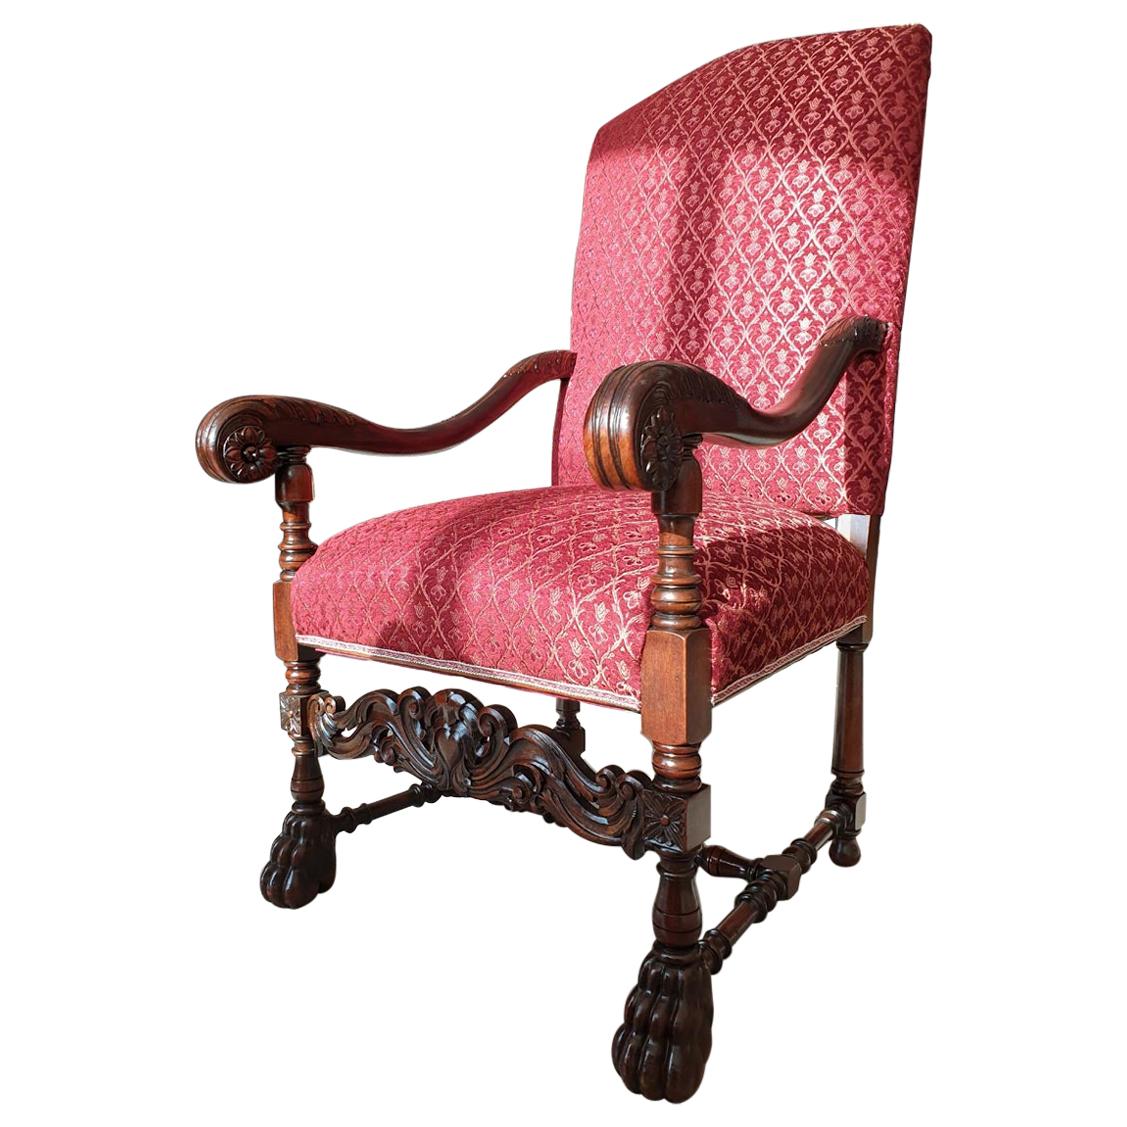 Renaissance Revival Style Solid Wood Armchair, Throne, circa 1920 For Sale